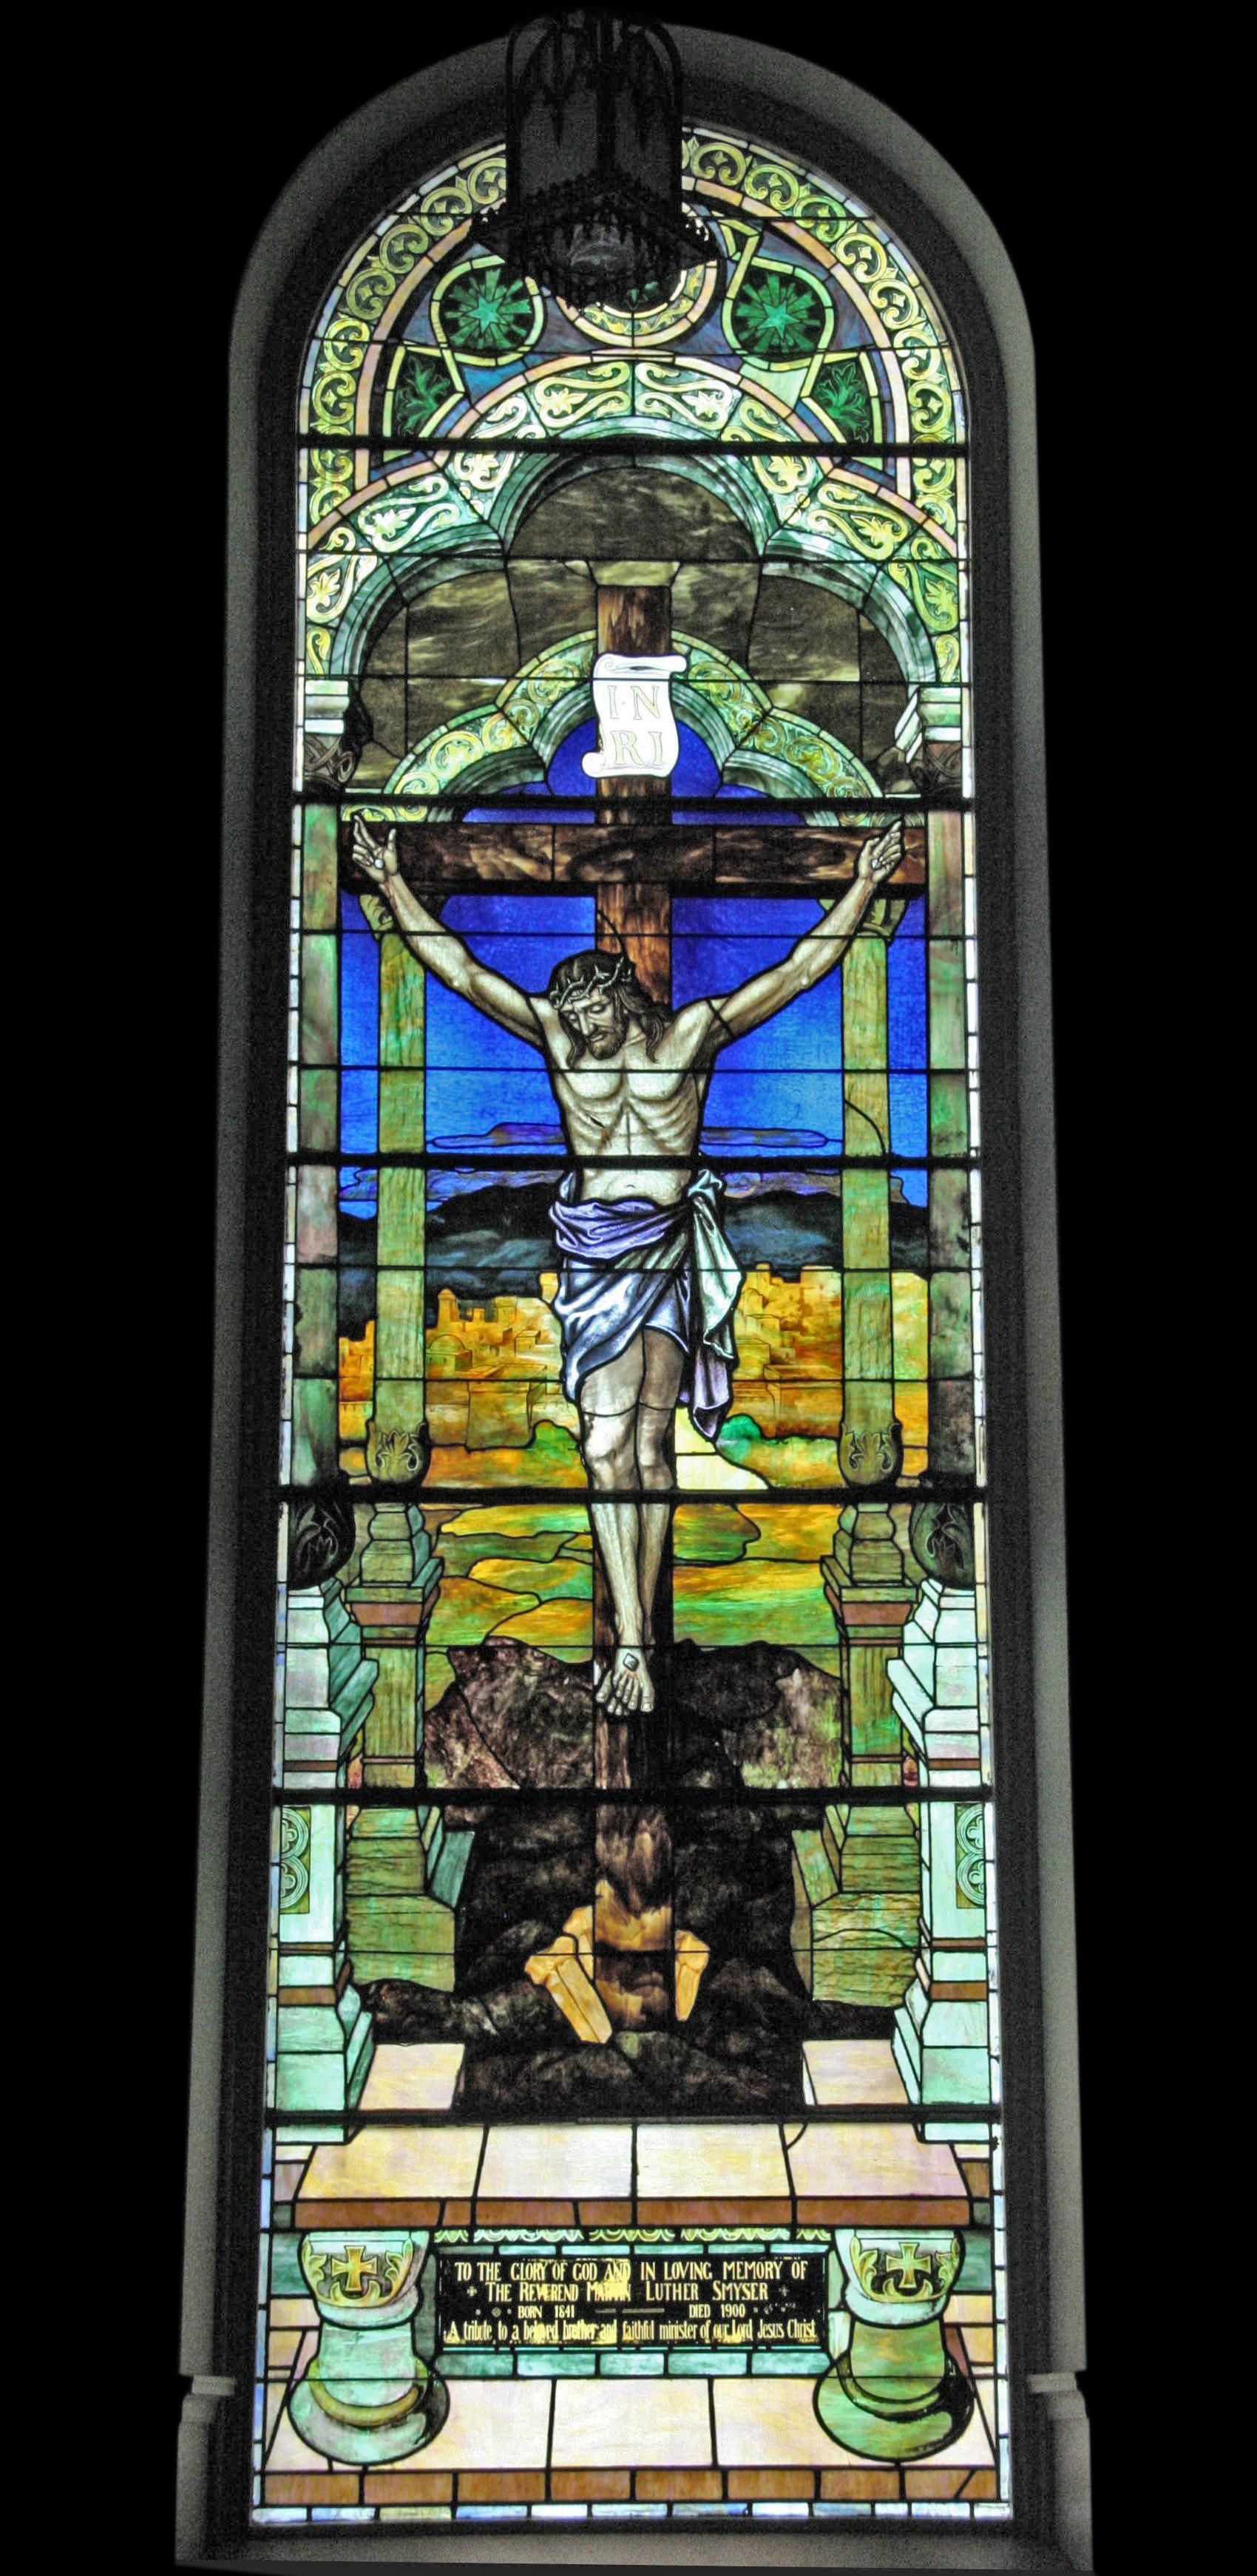 1901 Religious Large Stained Glass Portraying the Crucifixion of Our Lord Jesus 1